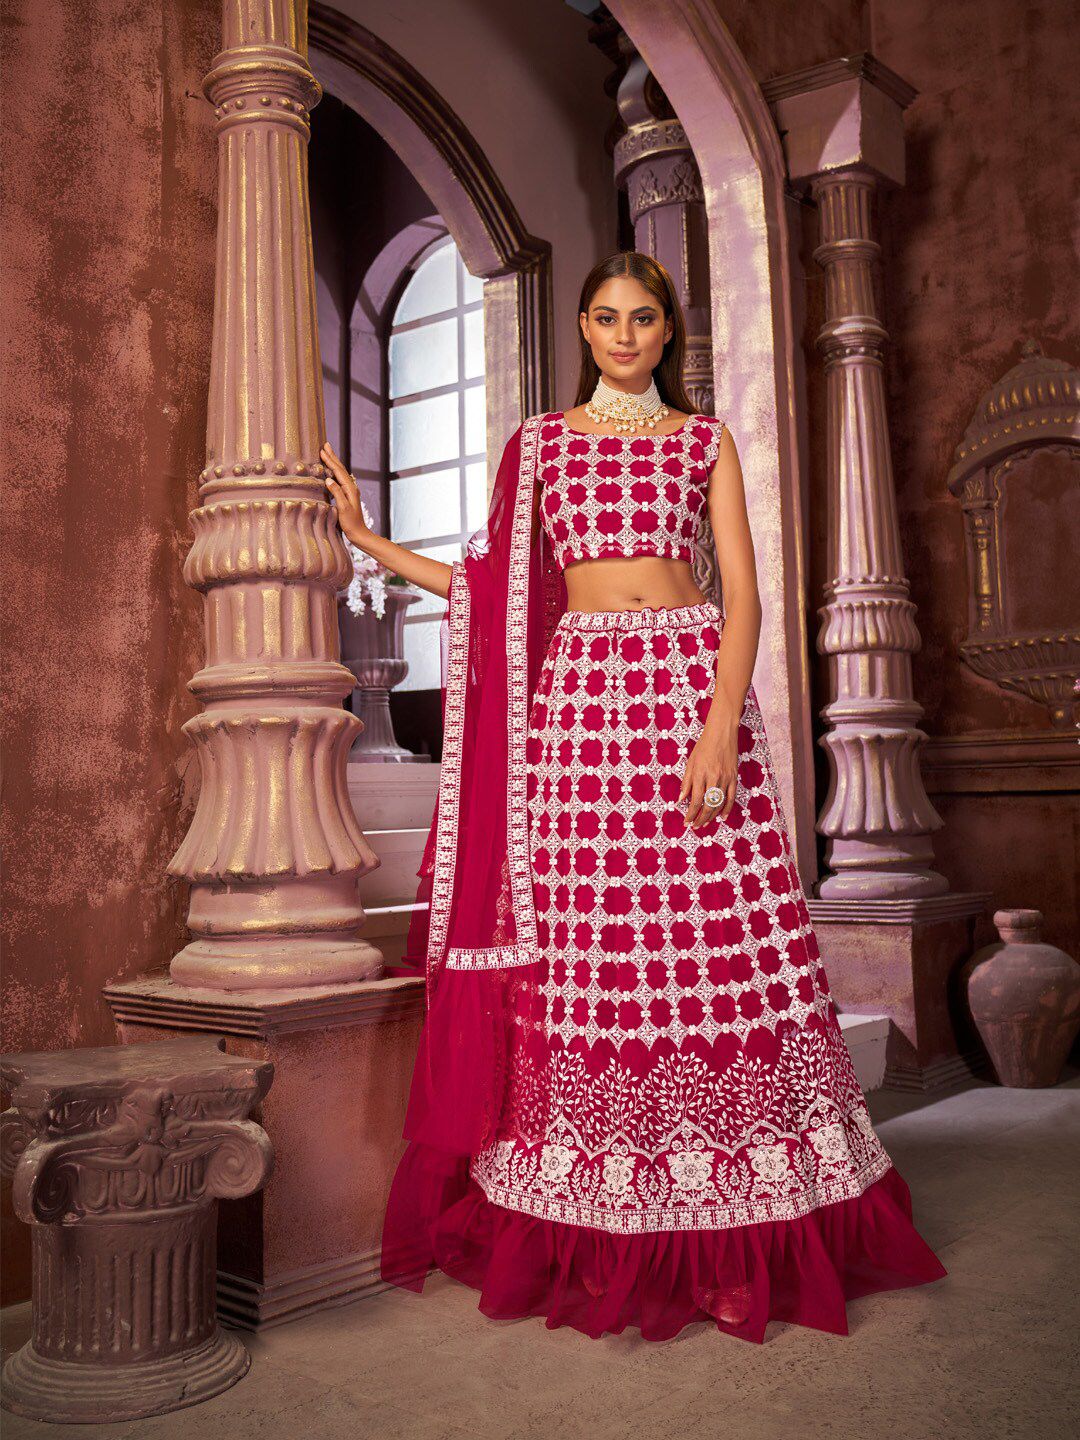 Pandadi Saree Pink & White Embroidered Sequinned Unstitched Lehenga & Semi-Stitched Blouse With Dupatta Price in India